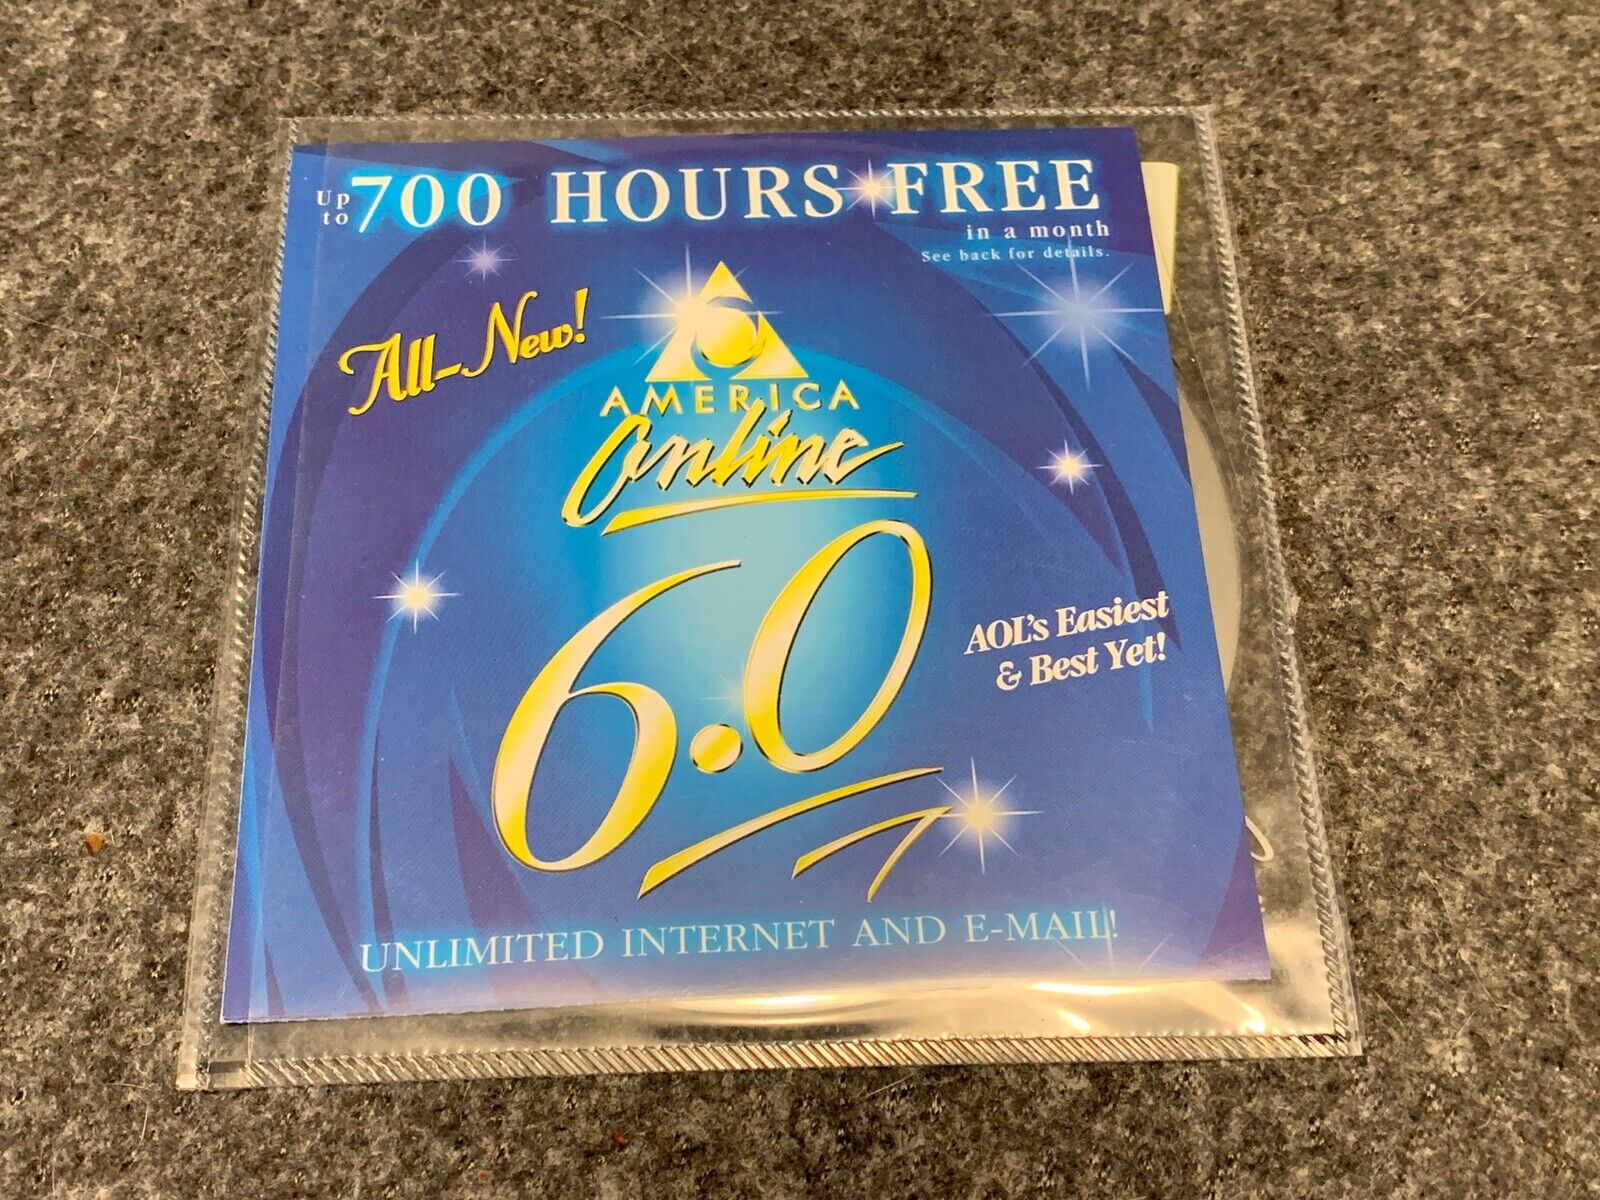 Rare America Online 6.0 Free Trial CD 700 Hours Free - SEALED